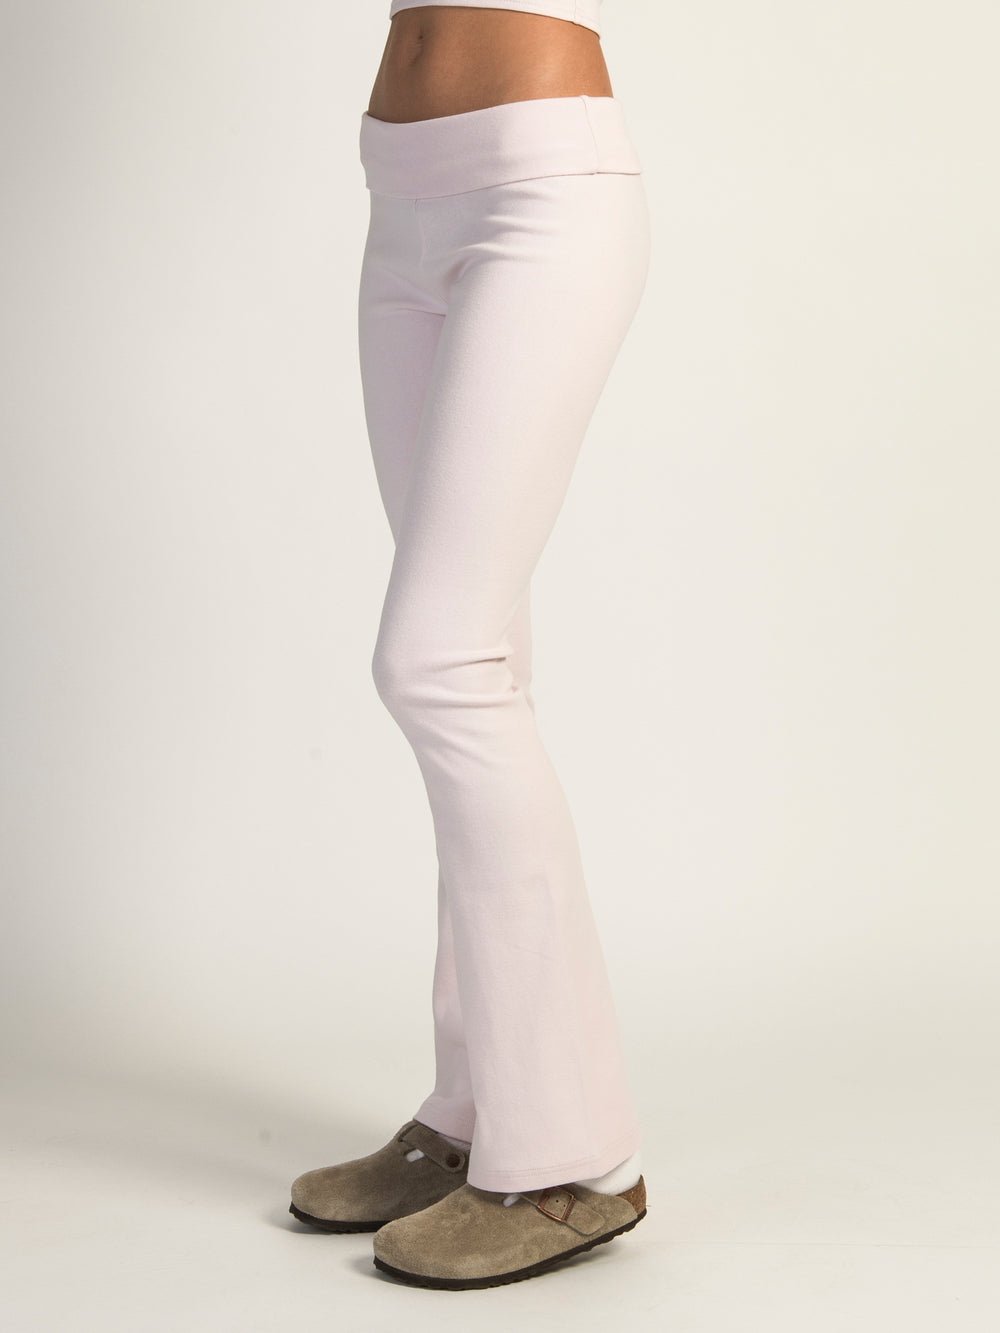 HARLOW MOLLY LOUNGE PANT - WHITE